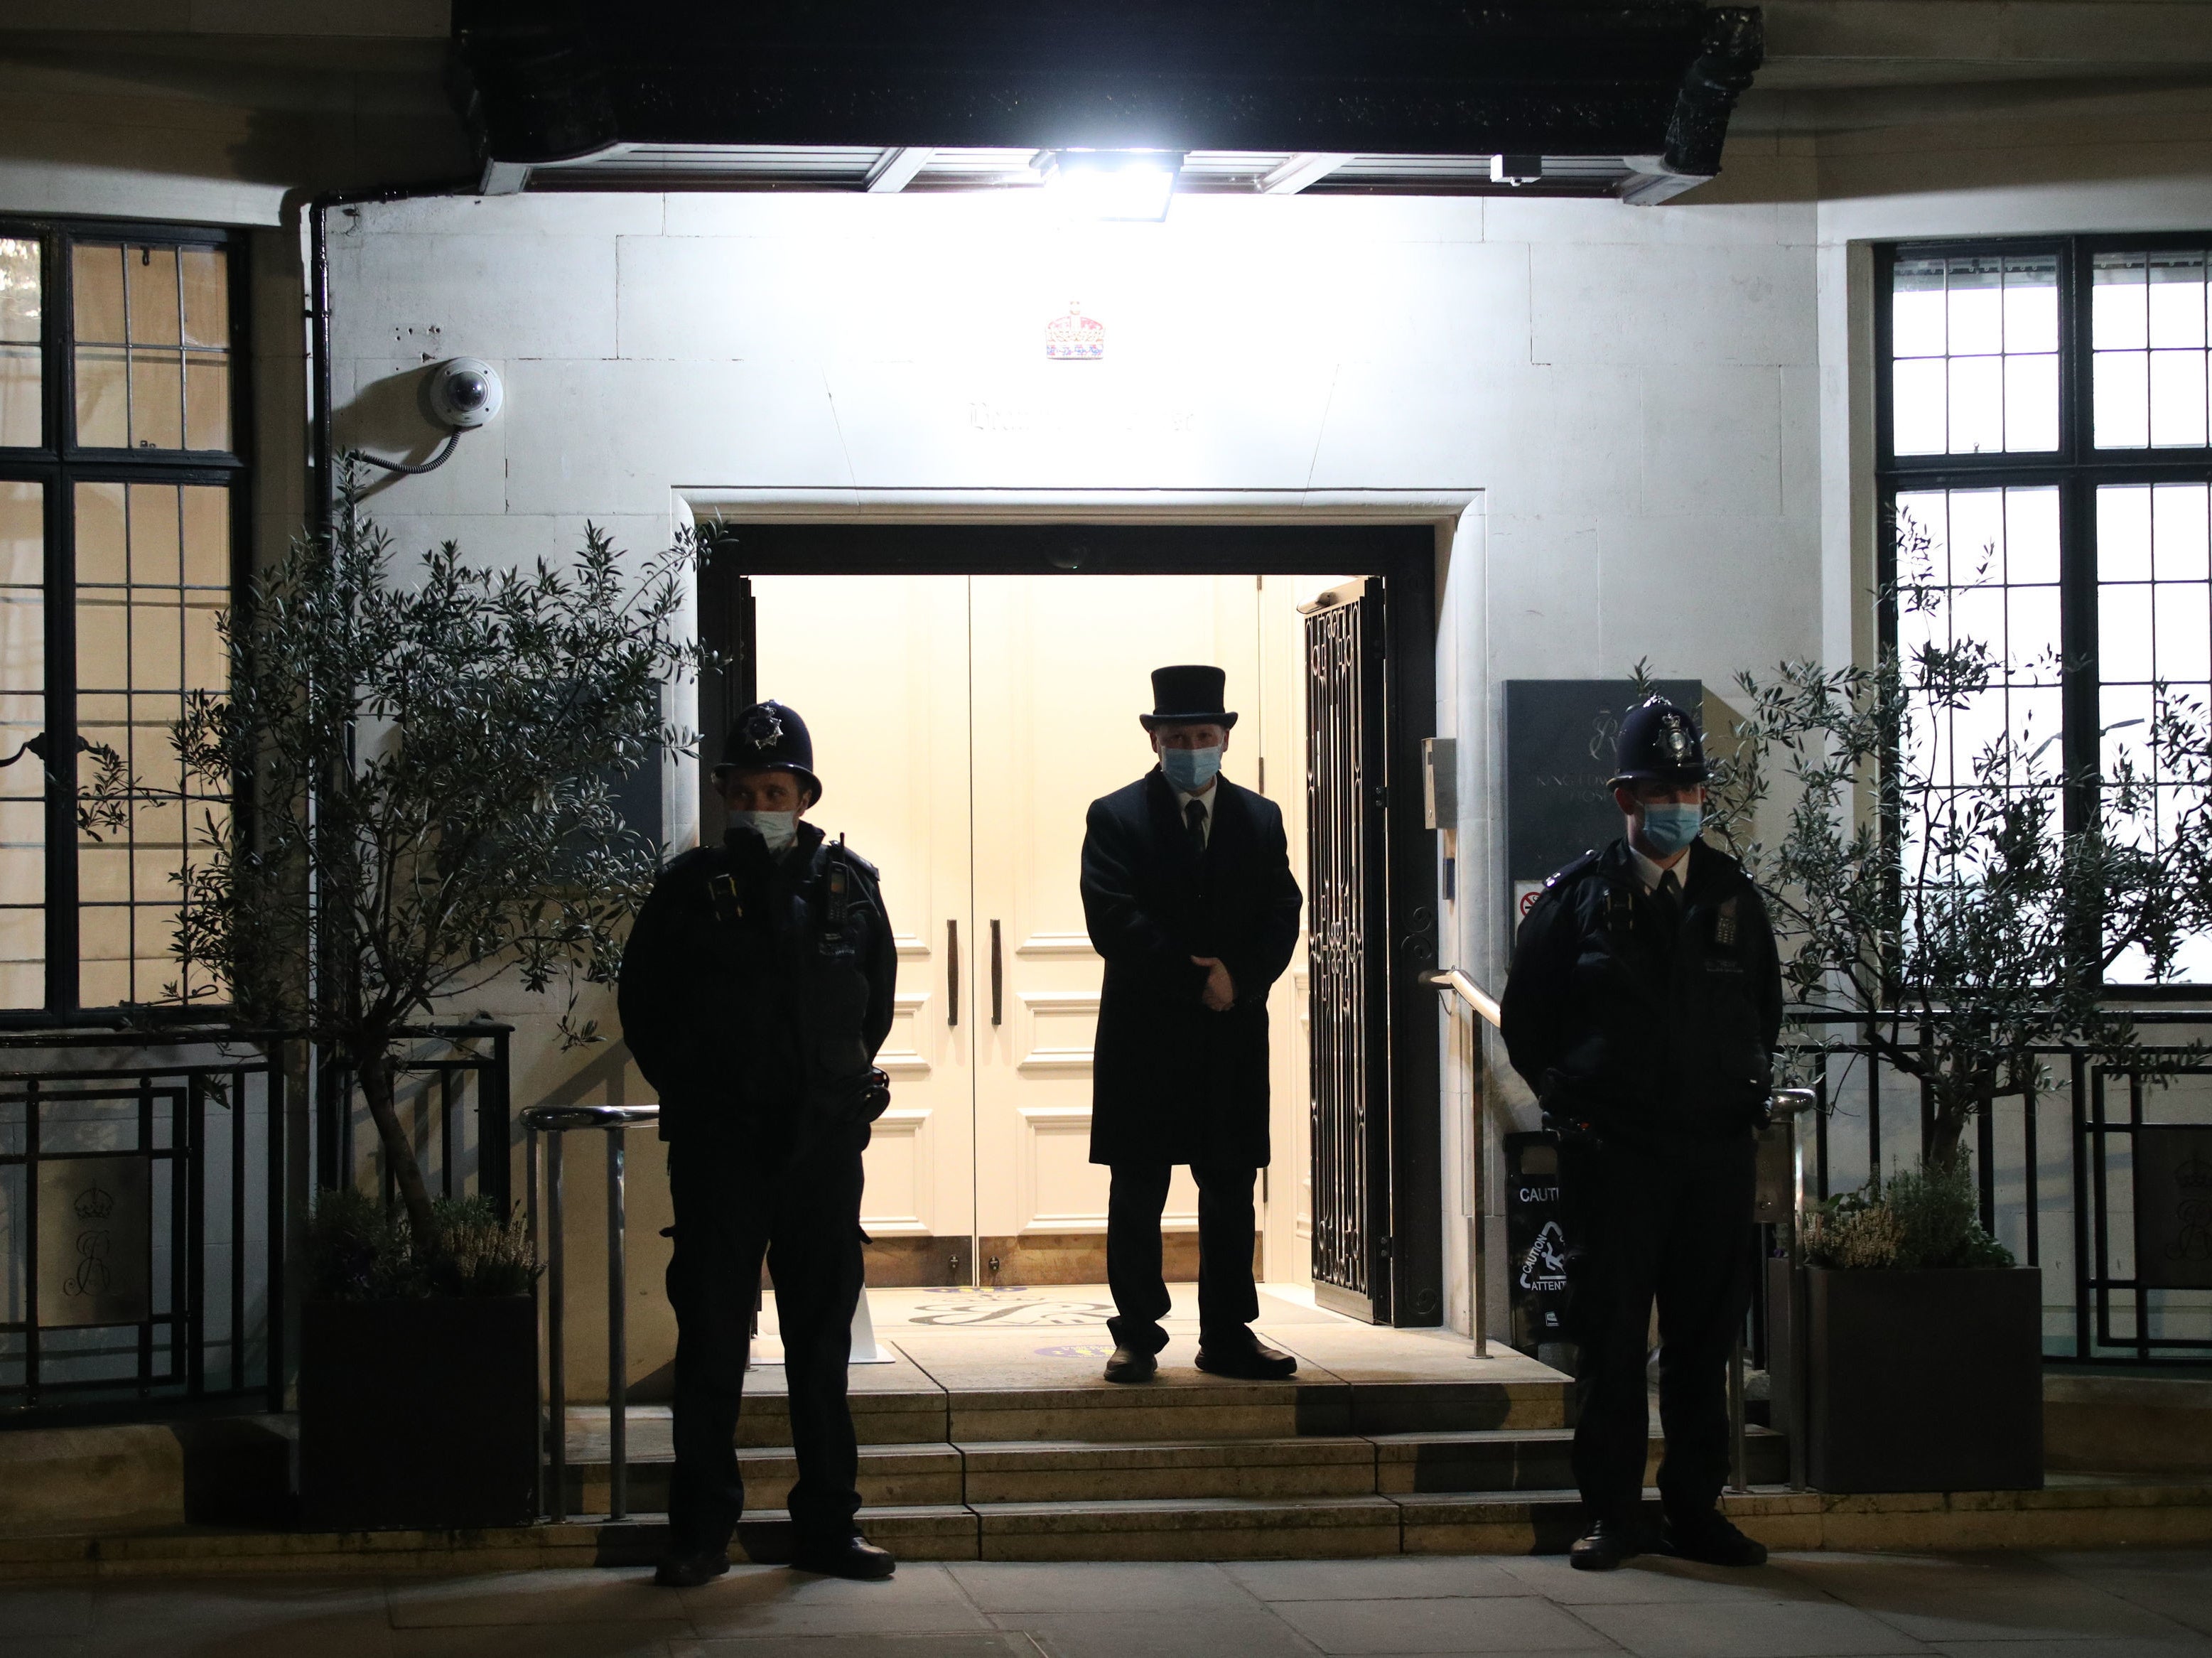 Police officers and a doorman outside the King Edward VII Hospital in London where the Duke of Edinburgh was admitted on Tuesday evening as a precautionary measure after feeling unwell